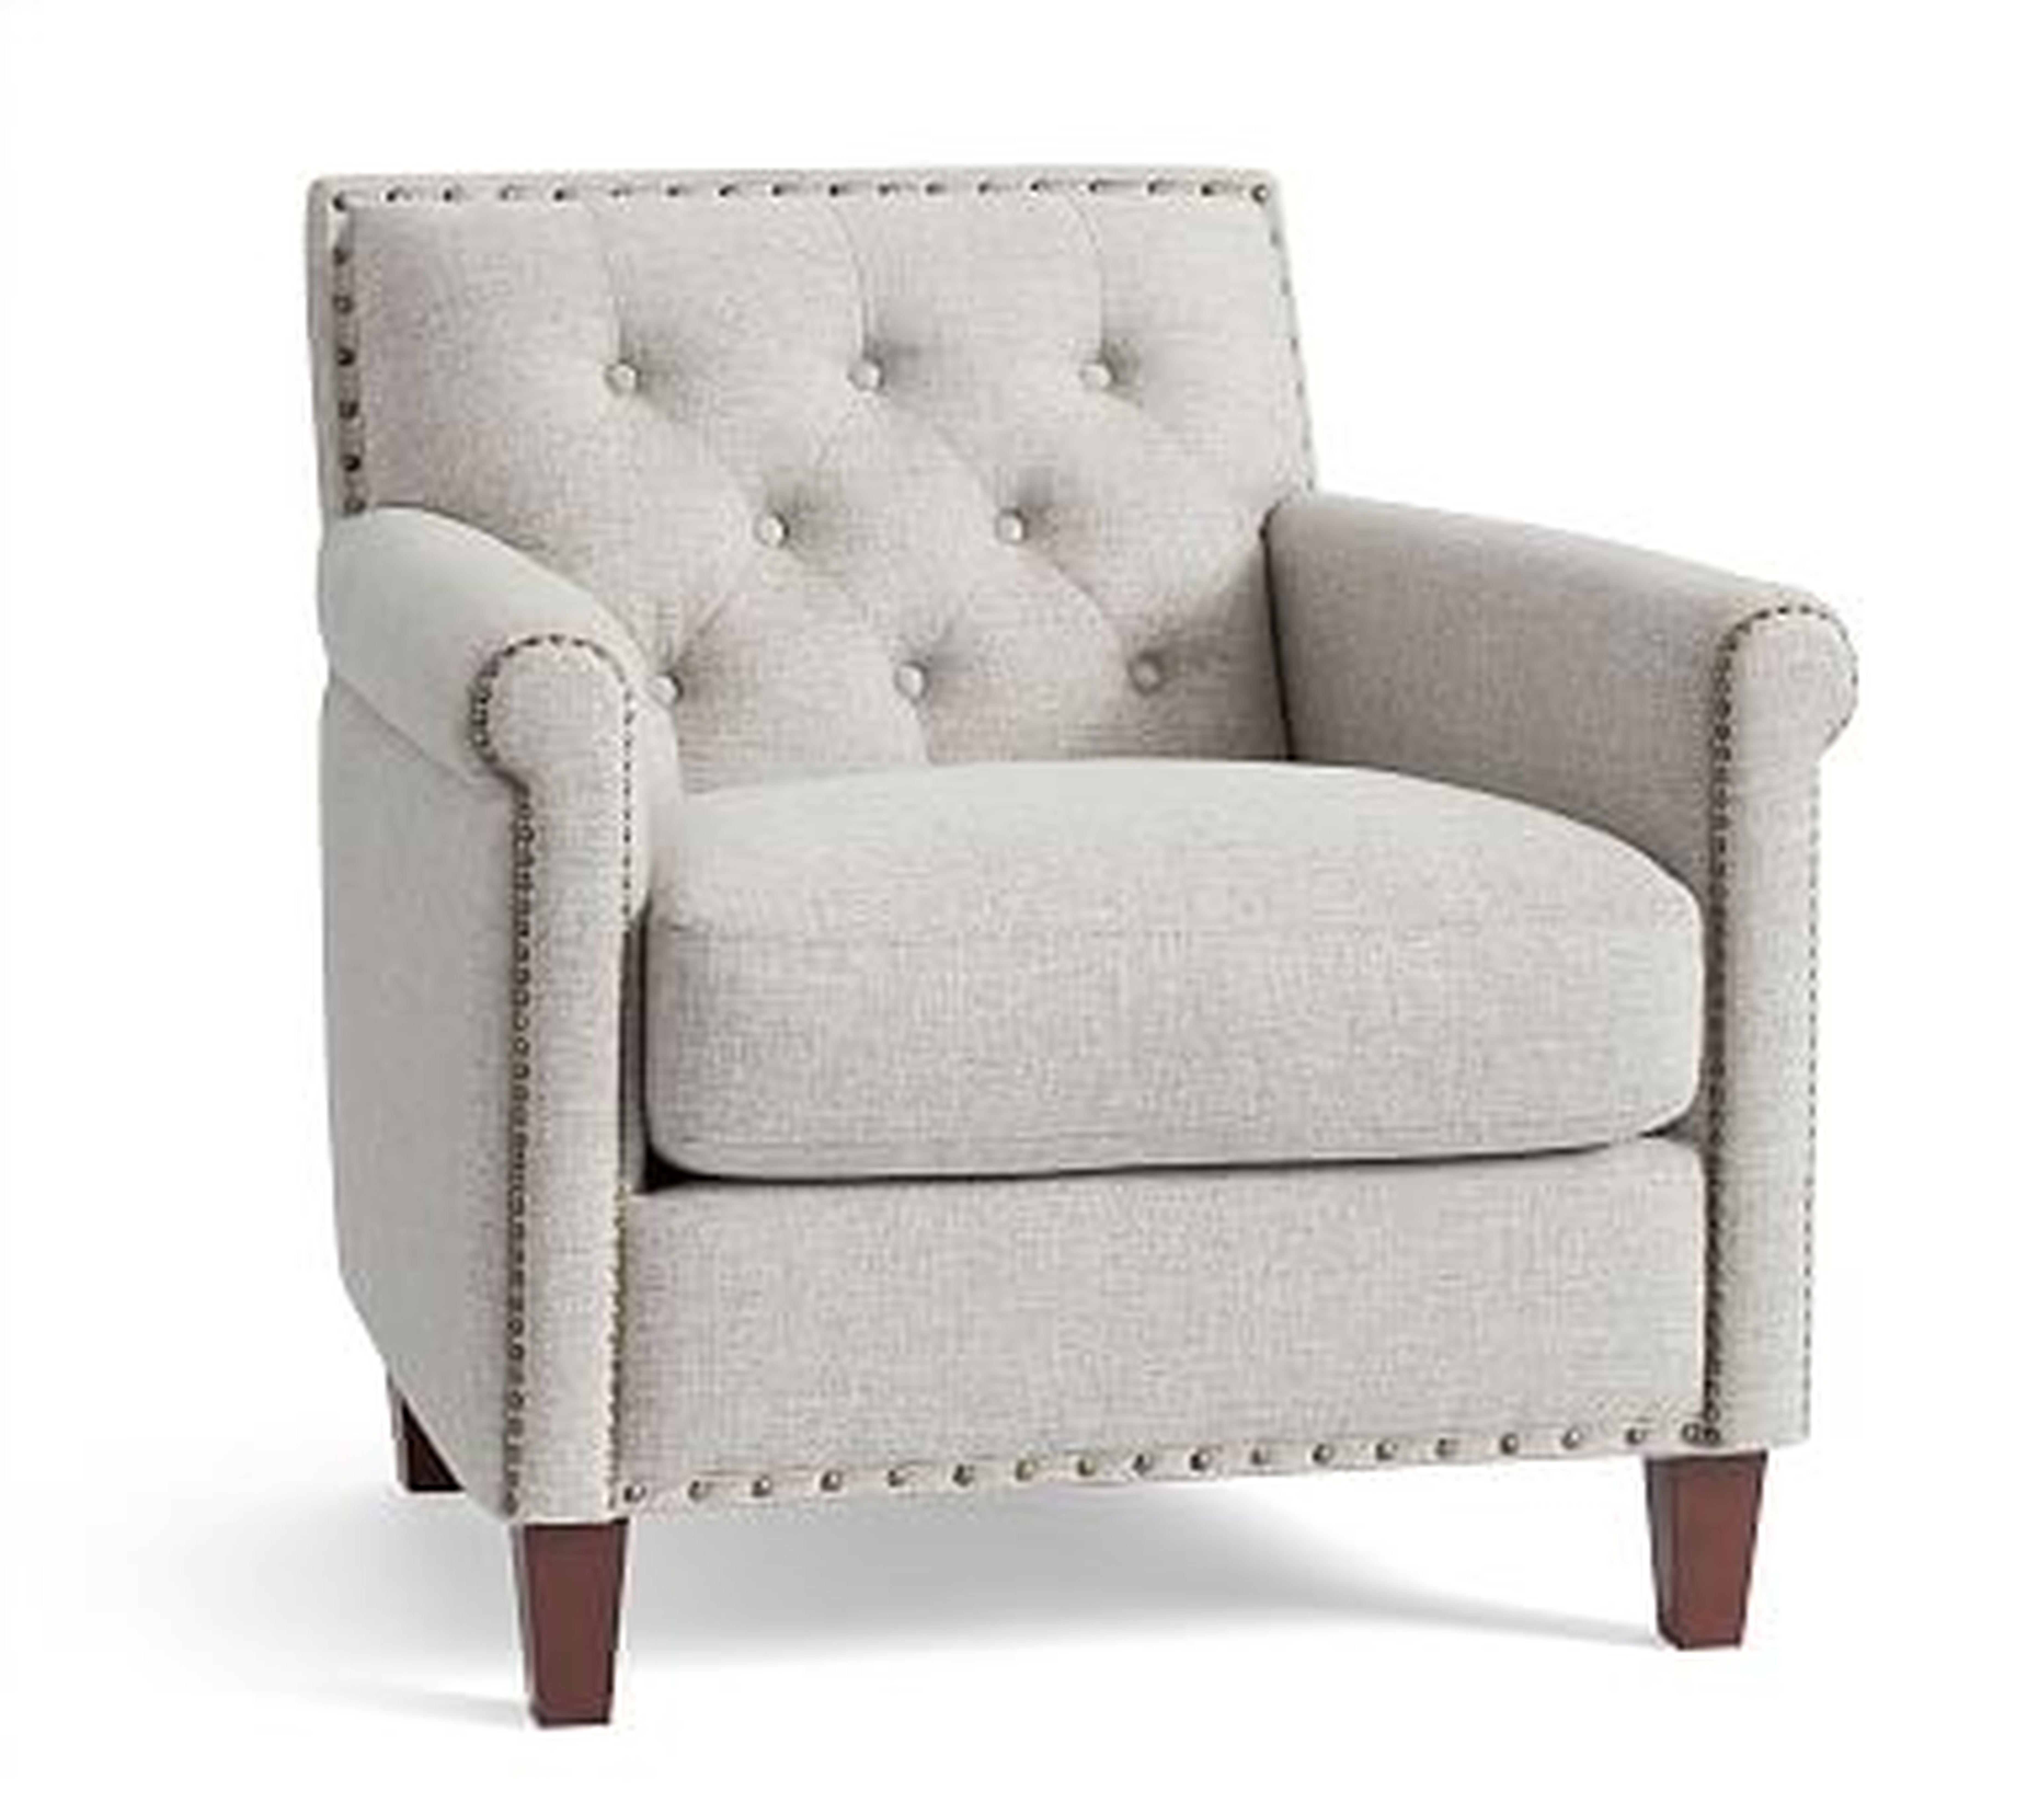 SoMa Roscoe Upholstered Tufted Armchair, Polyester Wrapped Cushions, Basketweave Slub Ash - Pottery Barn